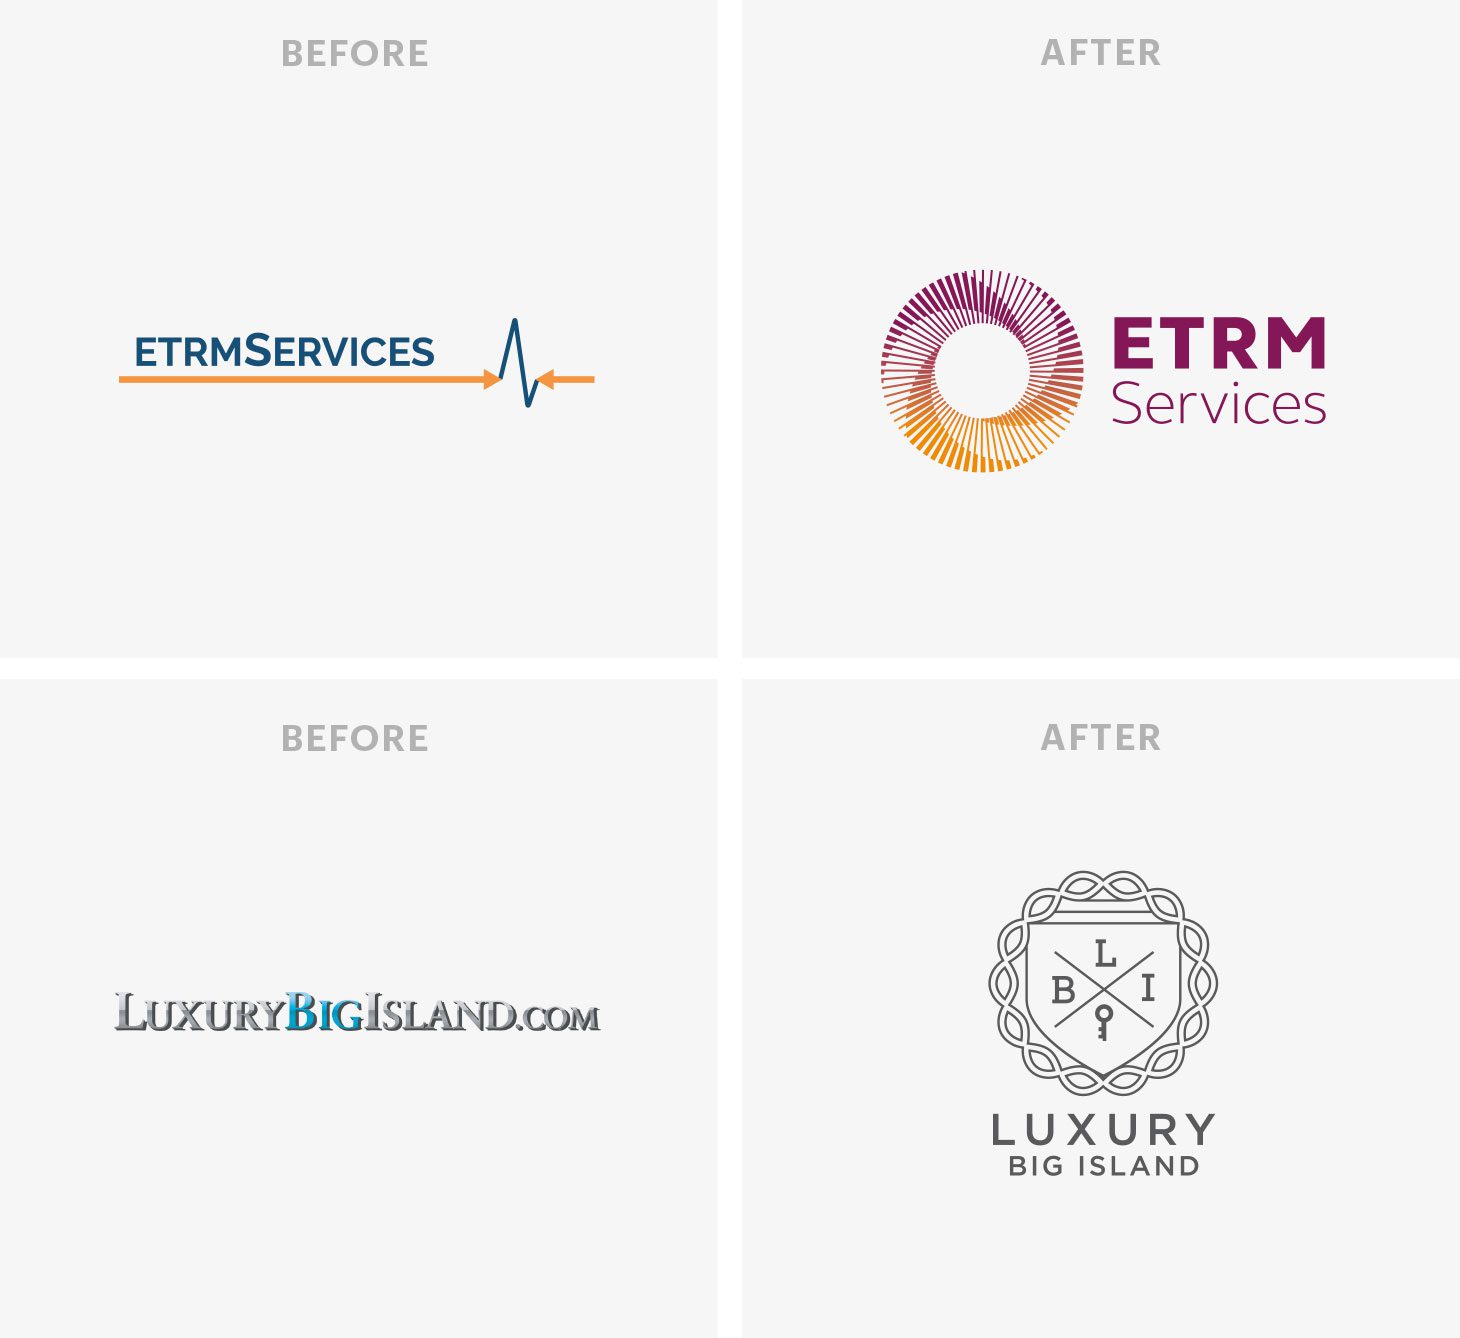 Logos Before and After